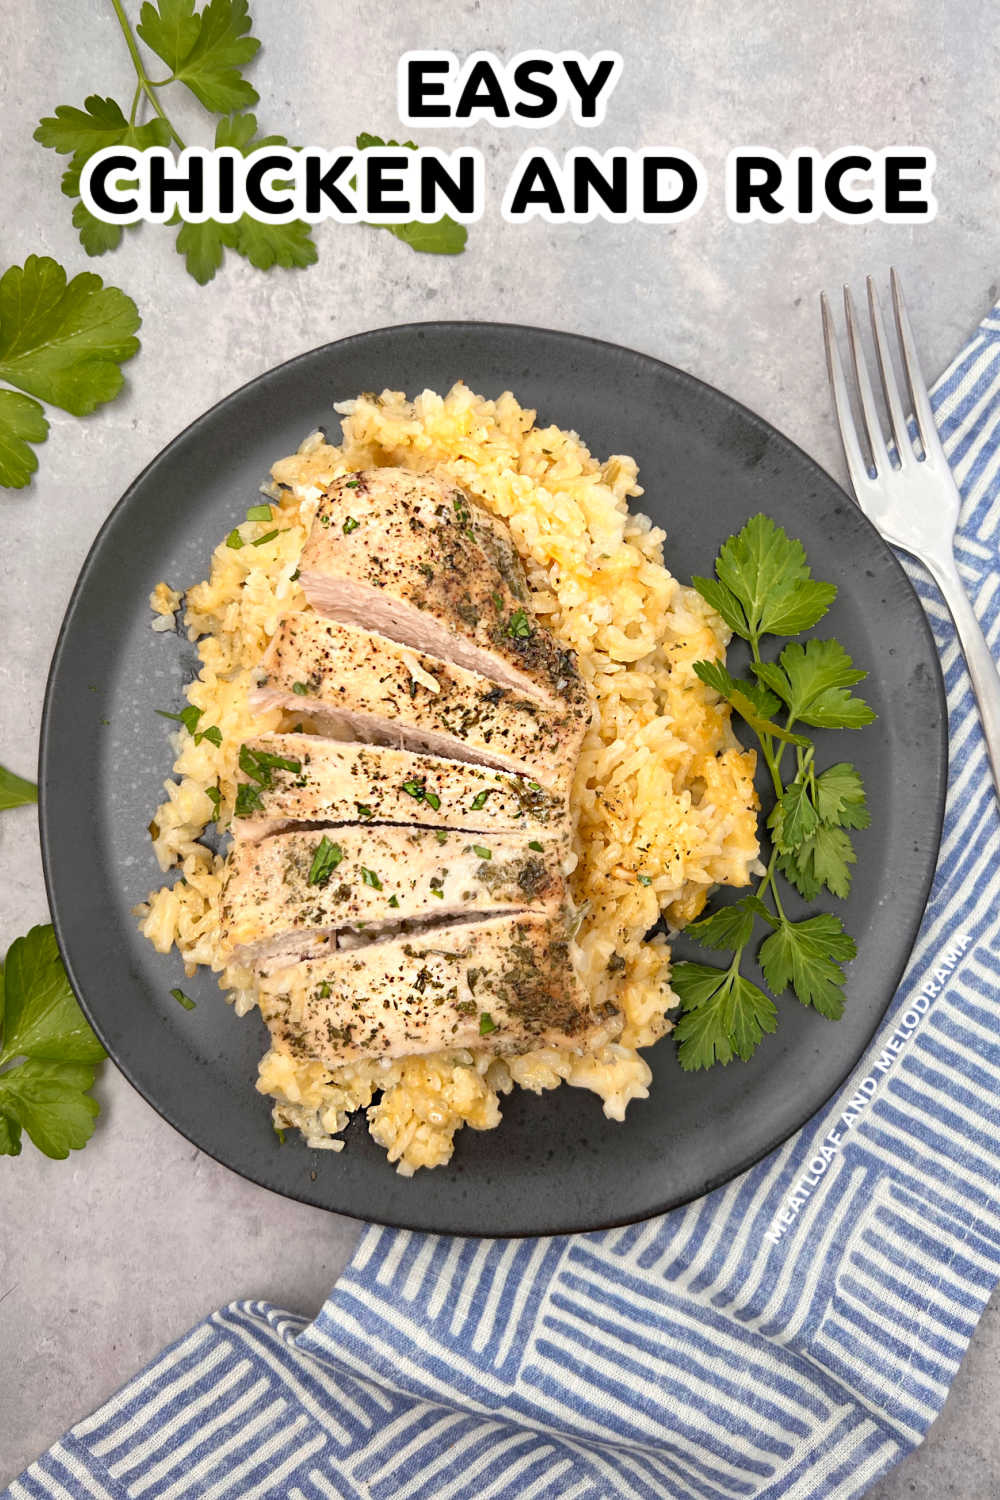 Grandma's Old Fashioned Chicken and Rice recipe is easy comfort food made with simple ingredients that the whole family will love. This easy chicken recipe is a family favorite perfect for busy weeknights, and even picky kids love it! via @meamel